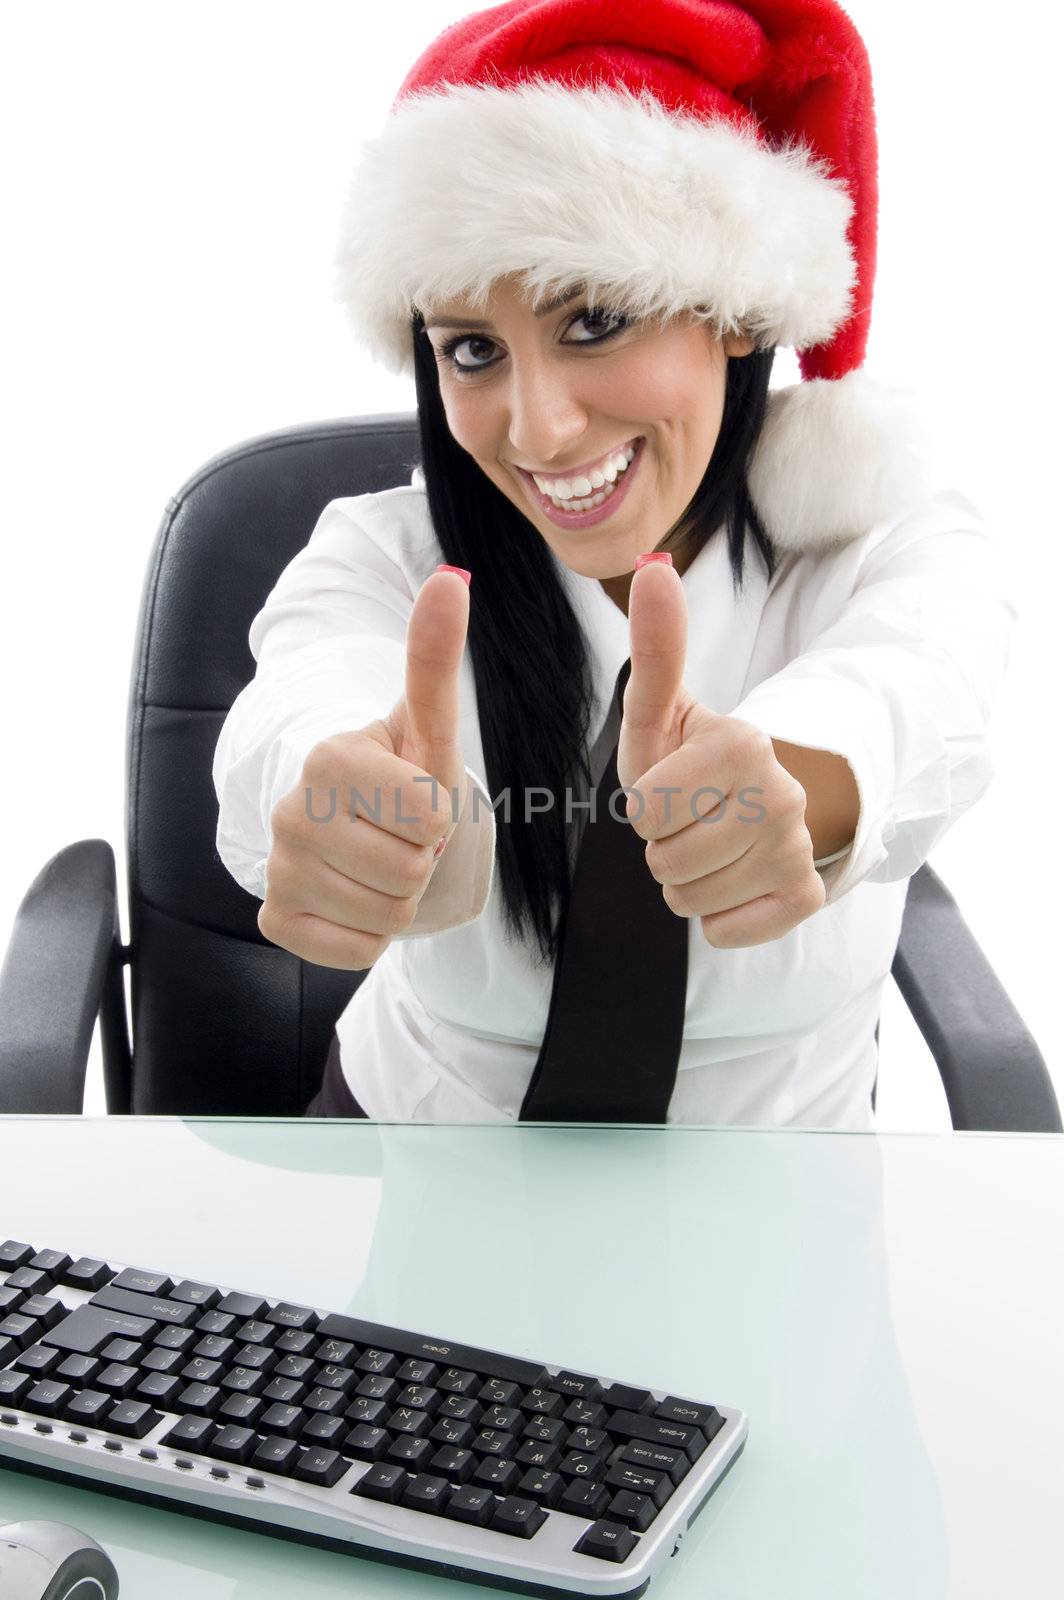 christmas woman with thumbs up by imagerymajestic